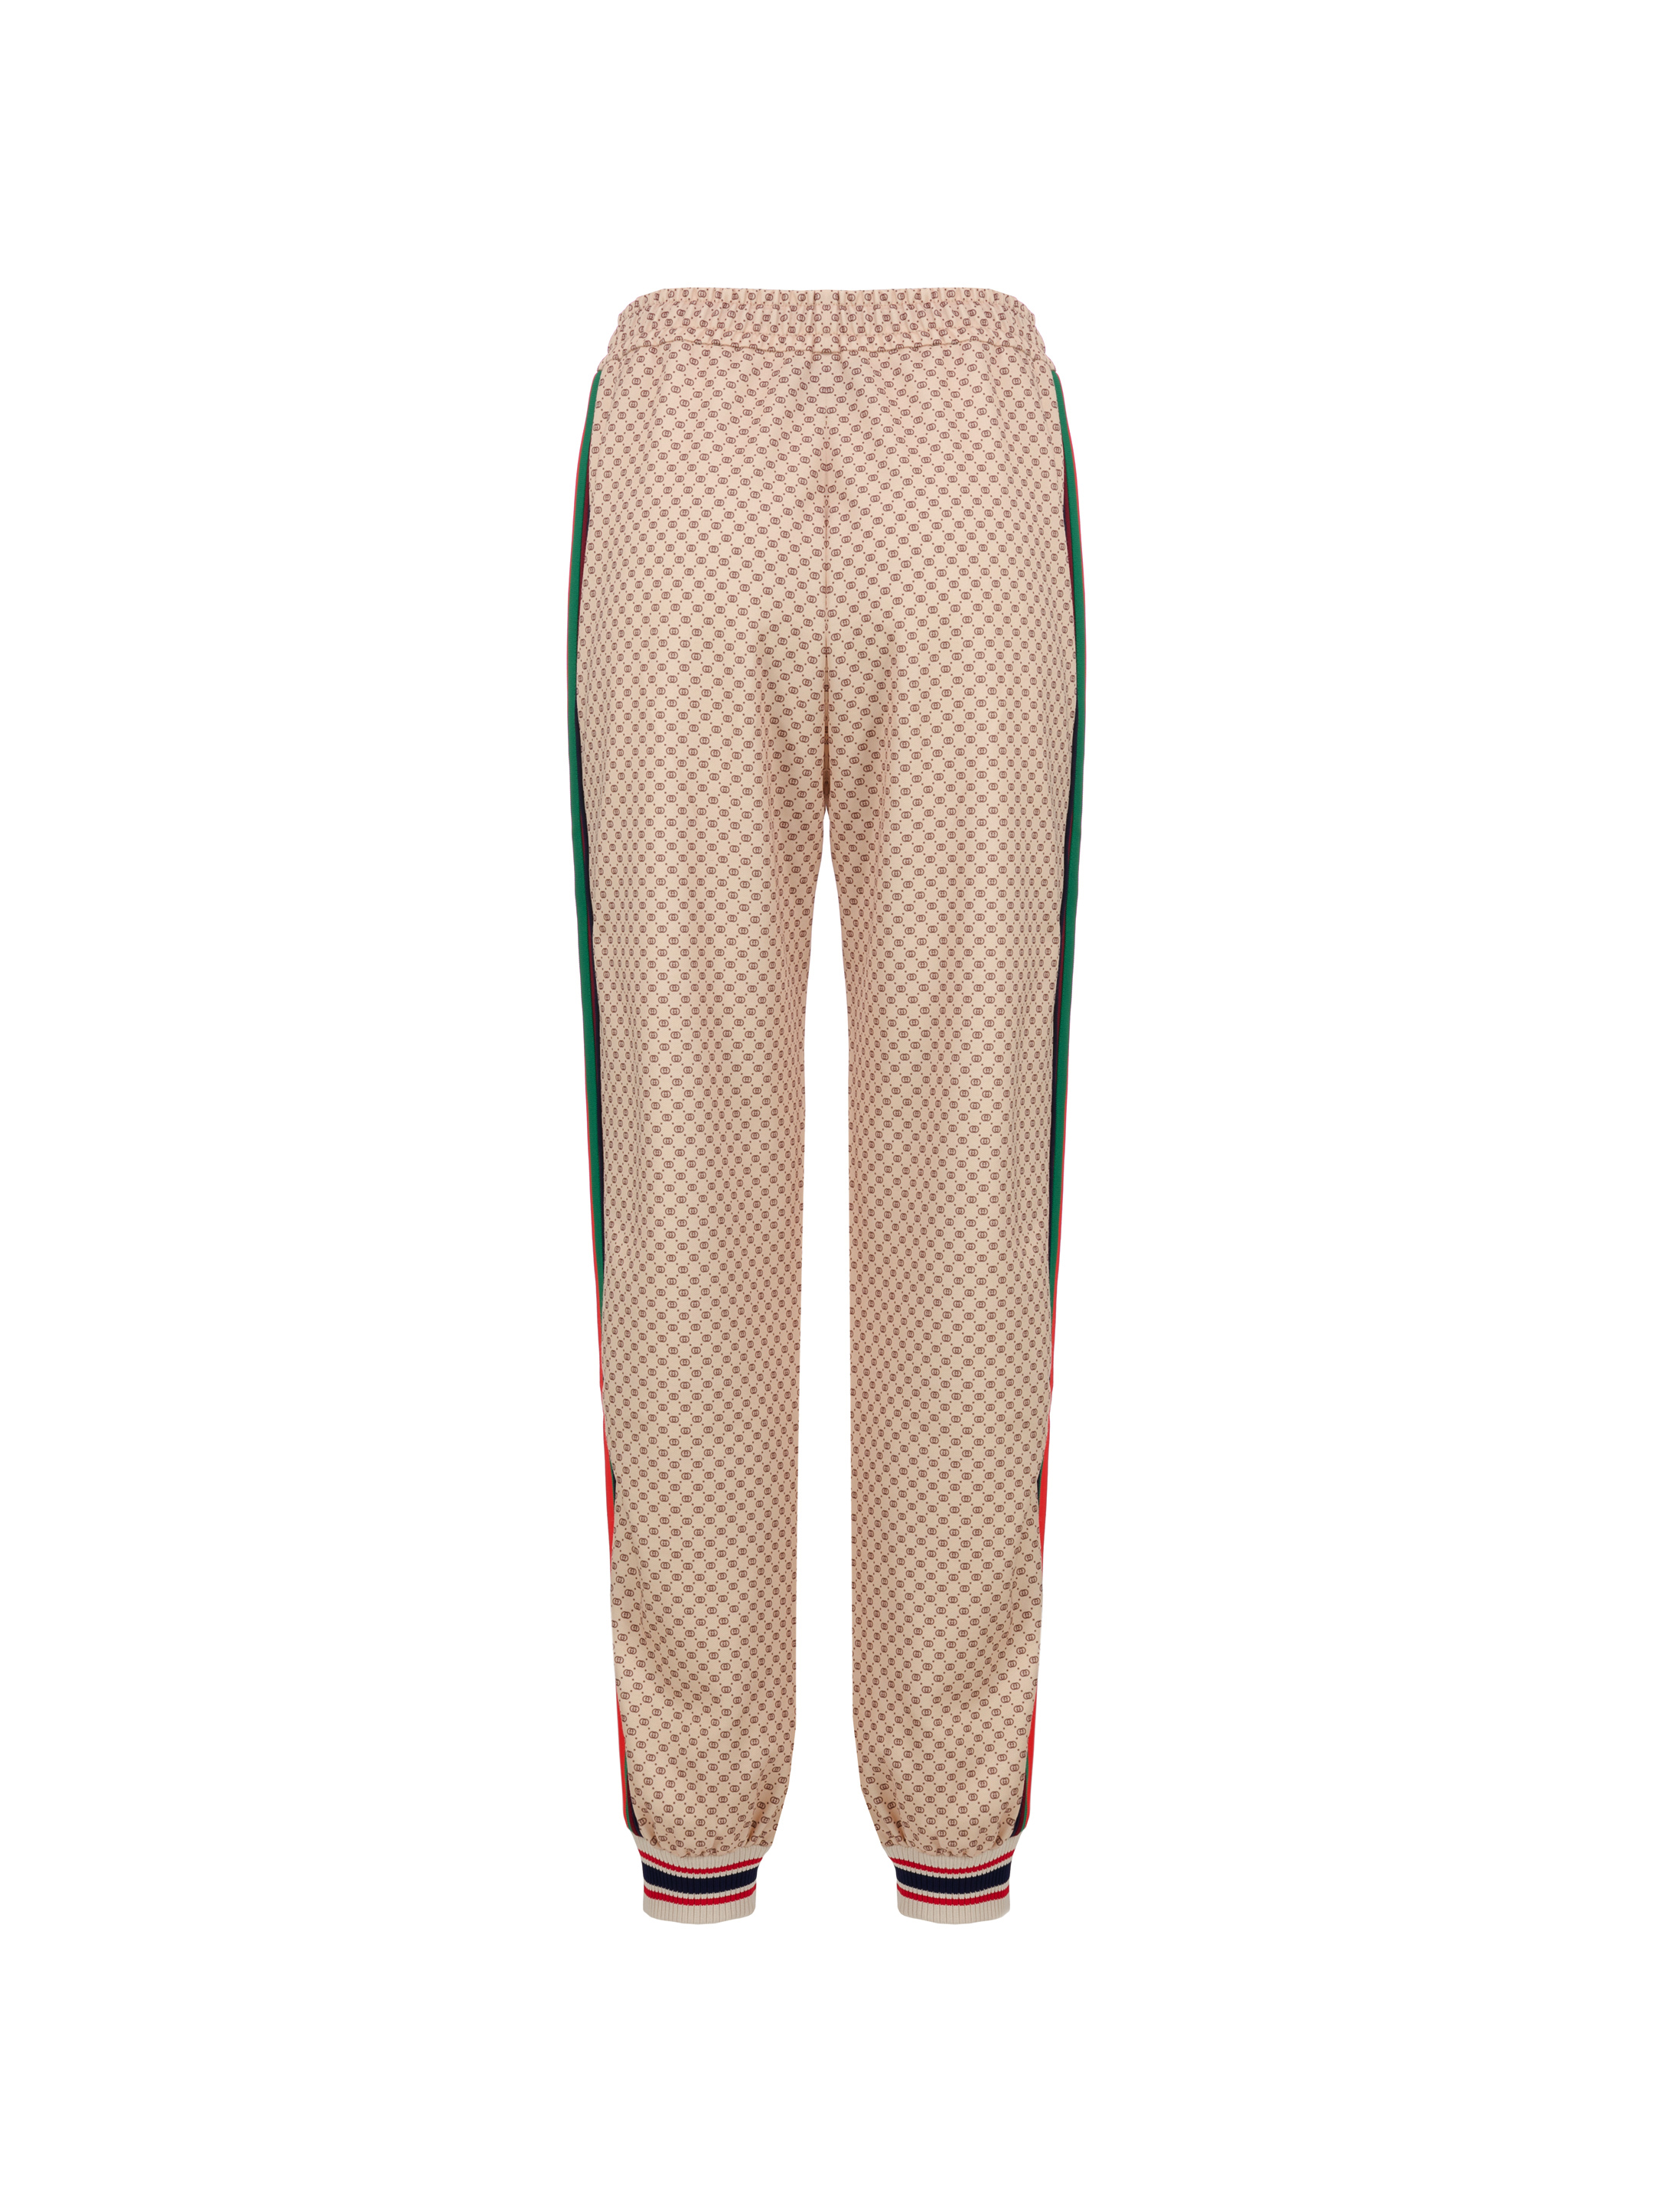 Gucci women's Sport pants with side stripes - buy for 664900 KZT in the  official Viled online store, art. 655198 